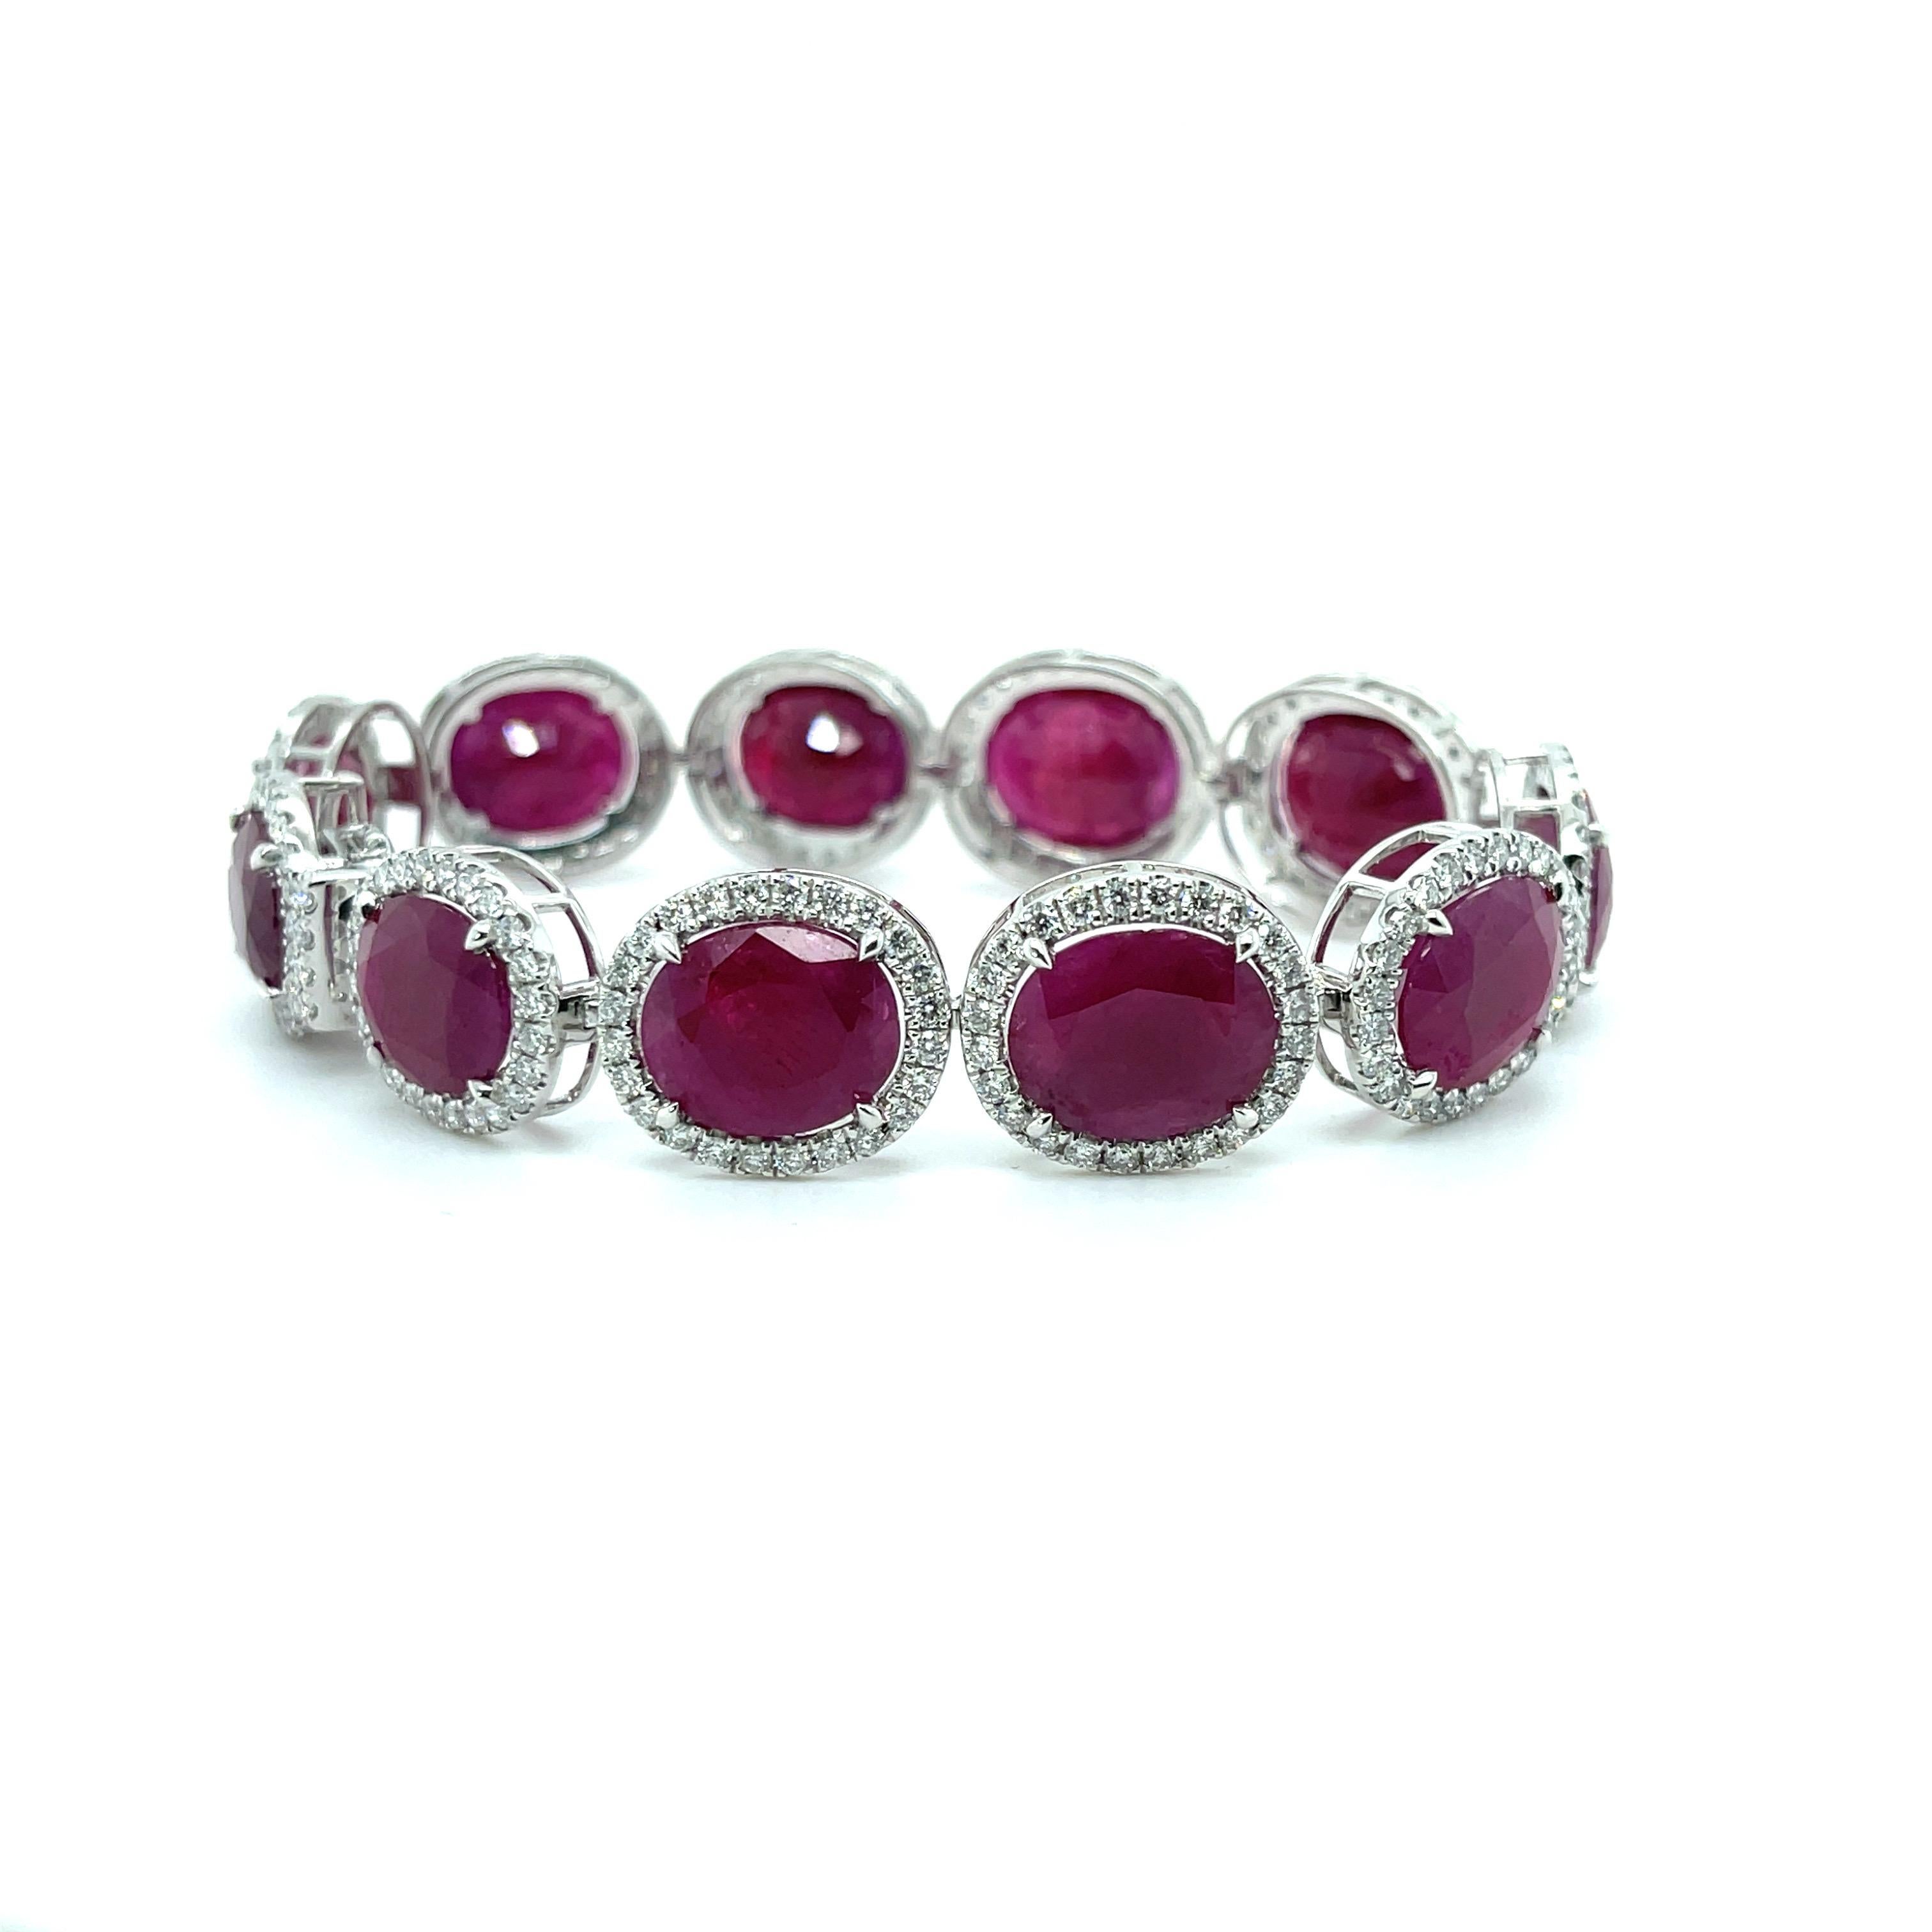 Natural Rubies and Diamonds, crafted in Platinum, complimented by a stunning polished finish design.

Item: One stamped Platinum (PT 950) Ruby and diamond bracelet featuring;


Eleven Rubies, 64.14ct ctw, 12.96mm x 10.94mm x 5.5  mm (average)